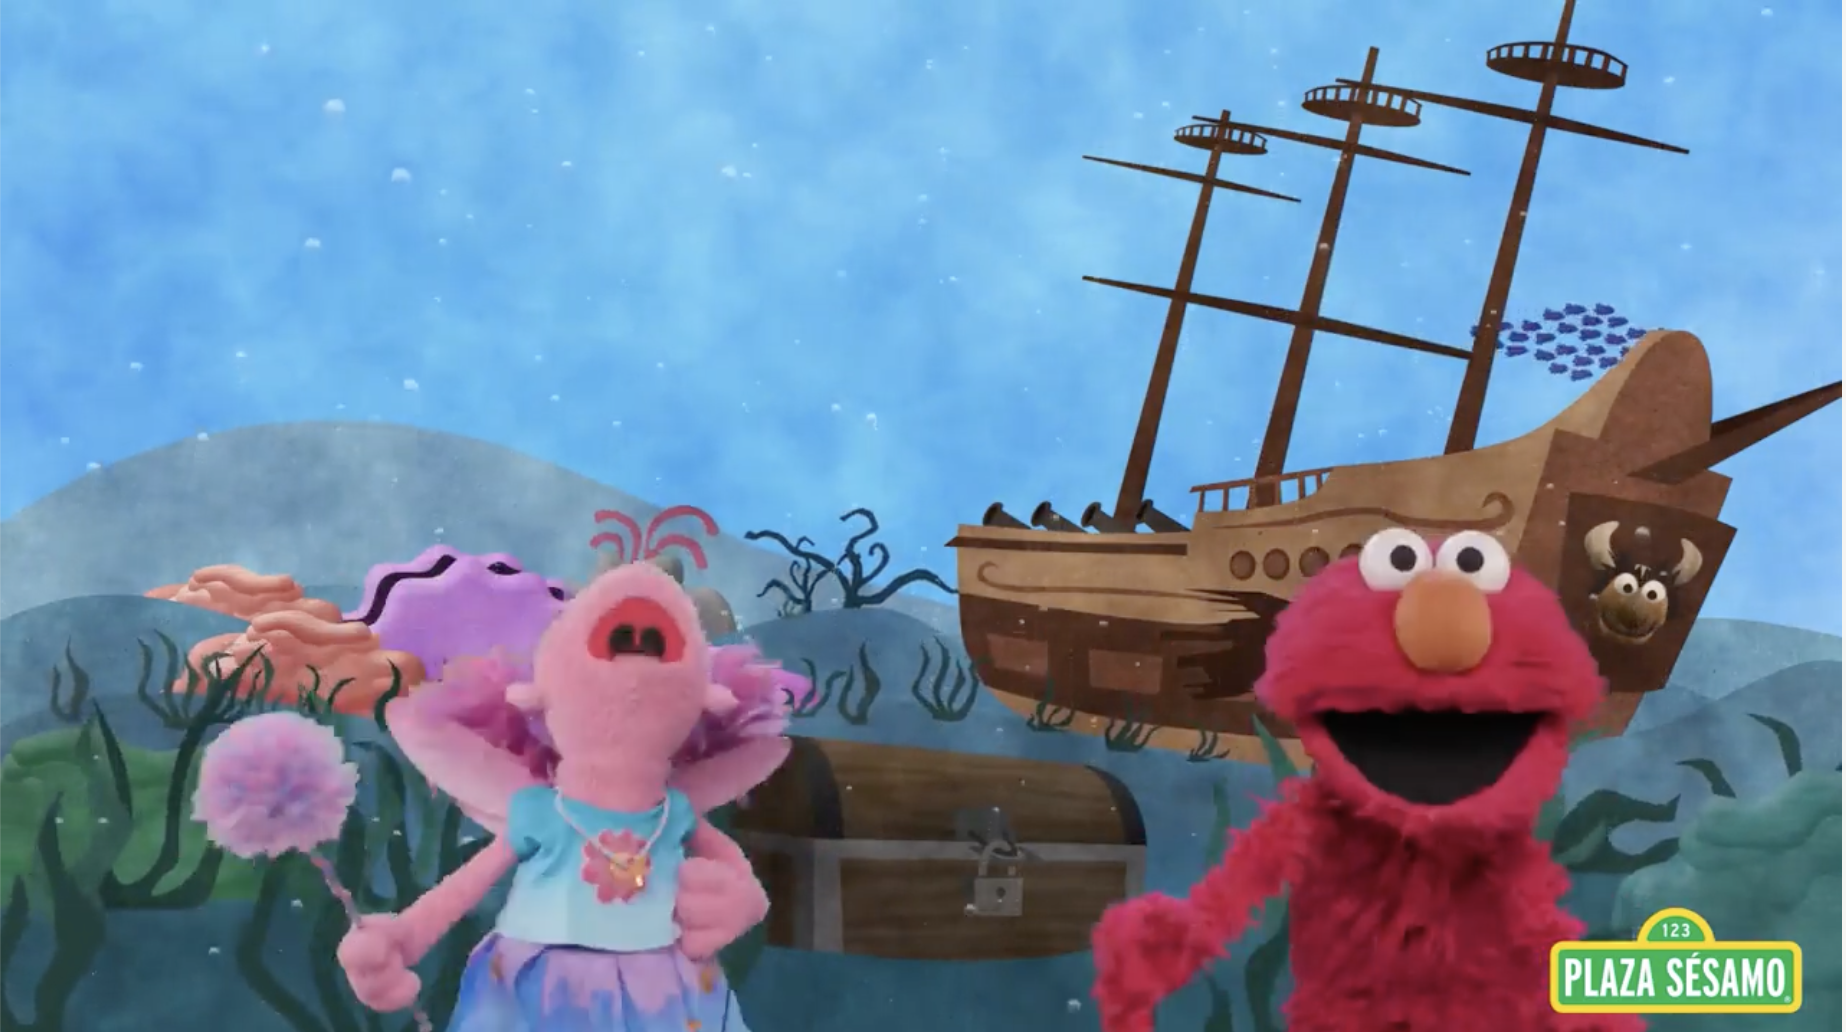 Sesame Street characters: Elmo and Abby Cadabby singing in a seascape, with a sunken ship, a treasure chest, and seaweed and corals visible in the background.